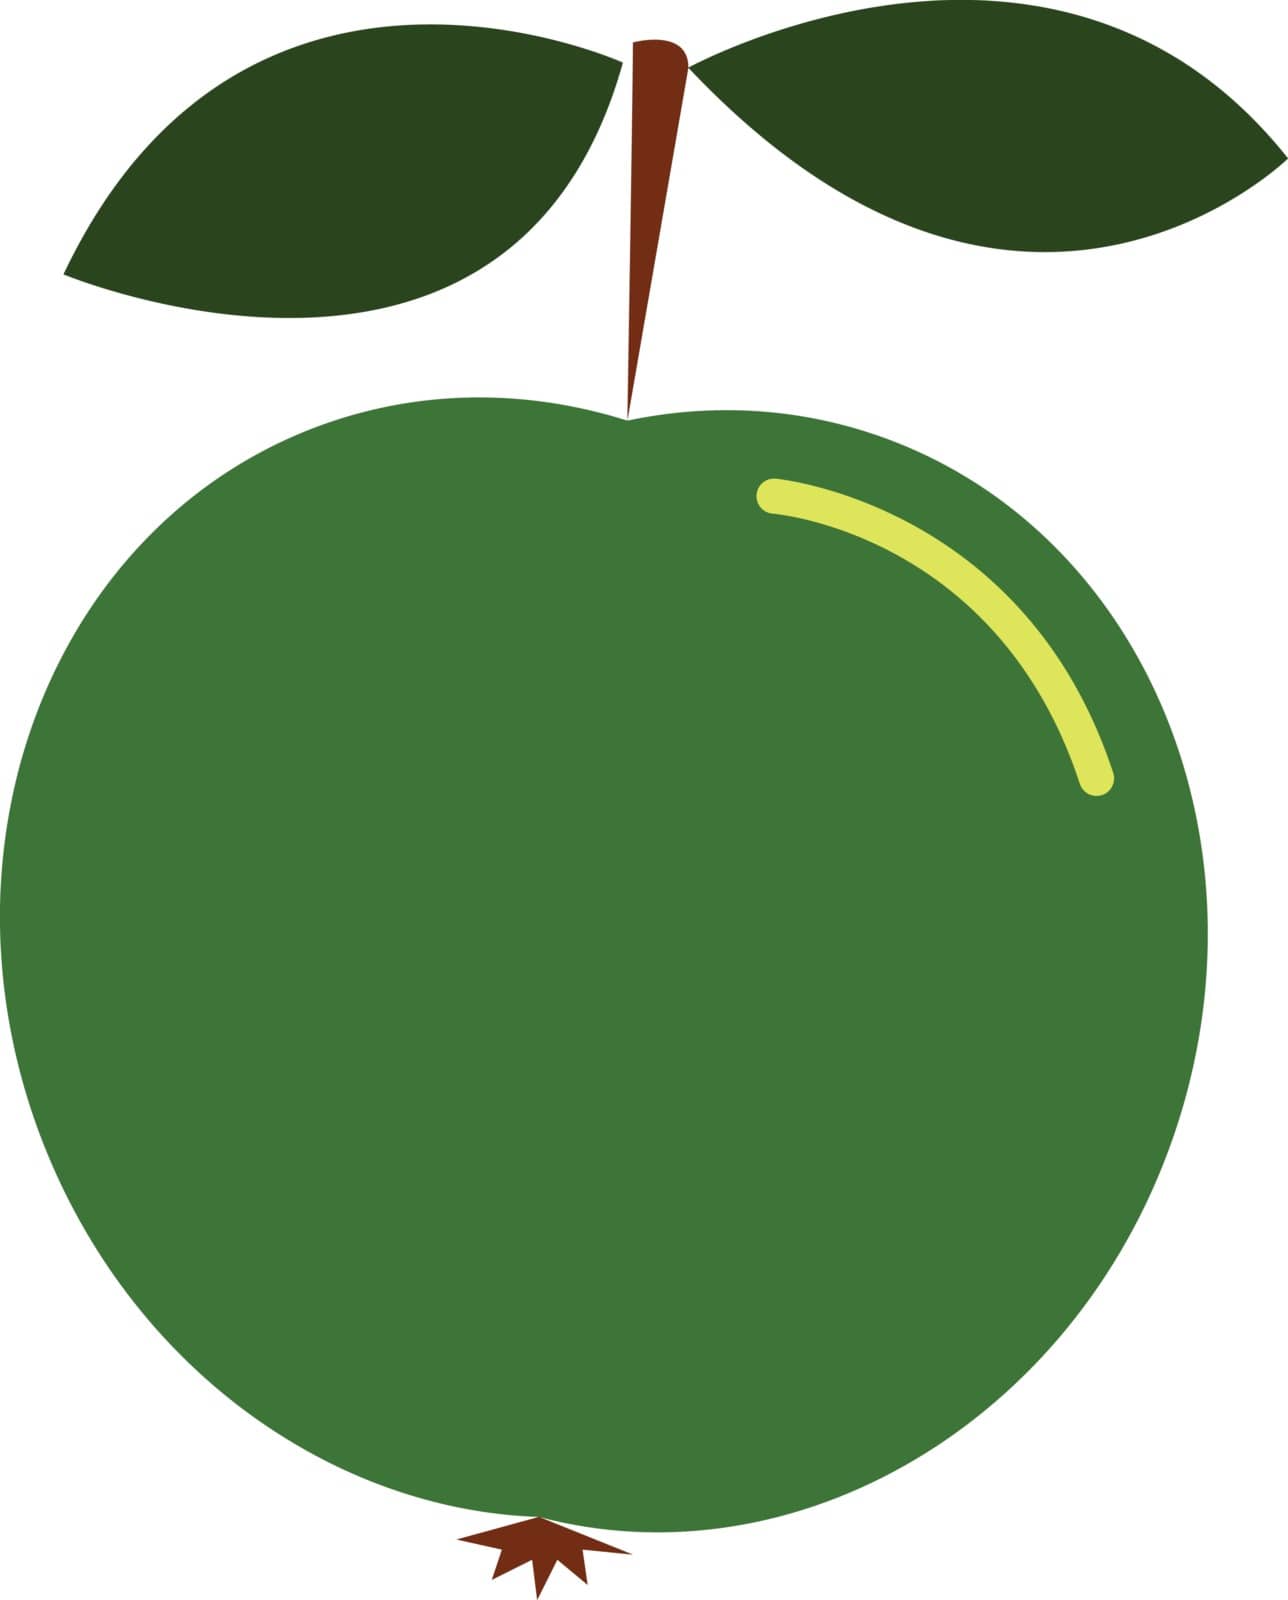 Clipart of a green apple with a short brown stalk and two leaves by Morphart